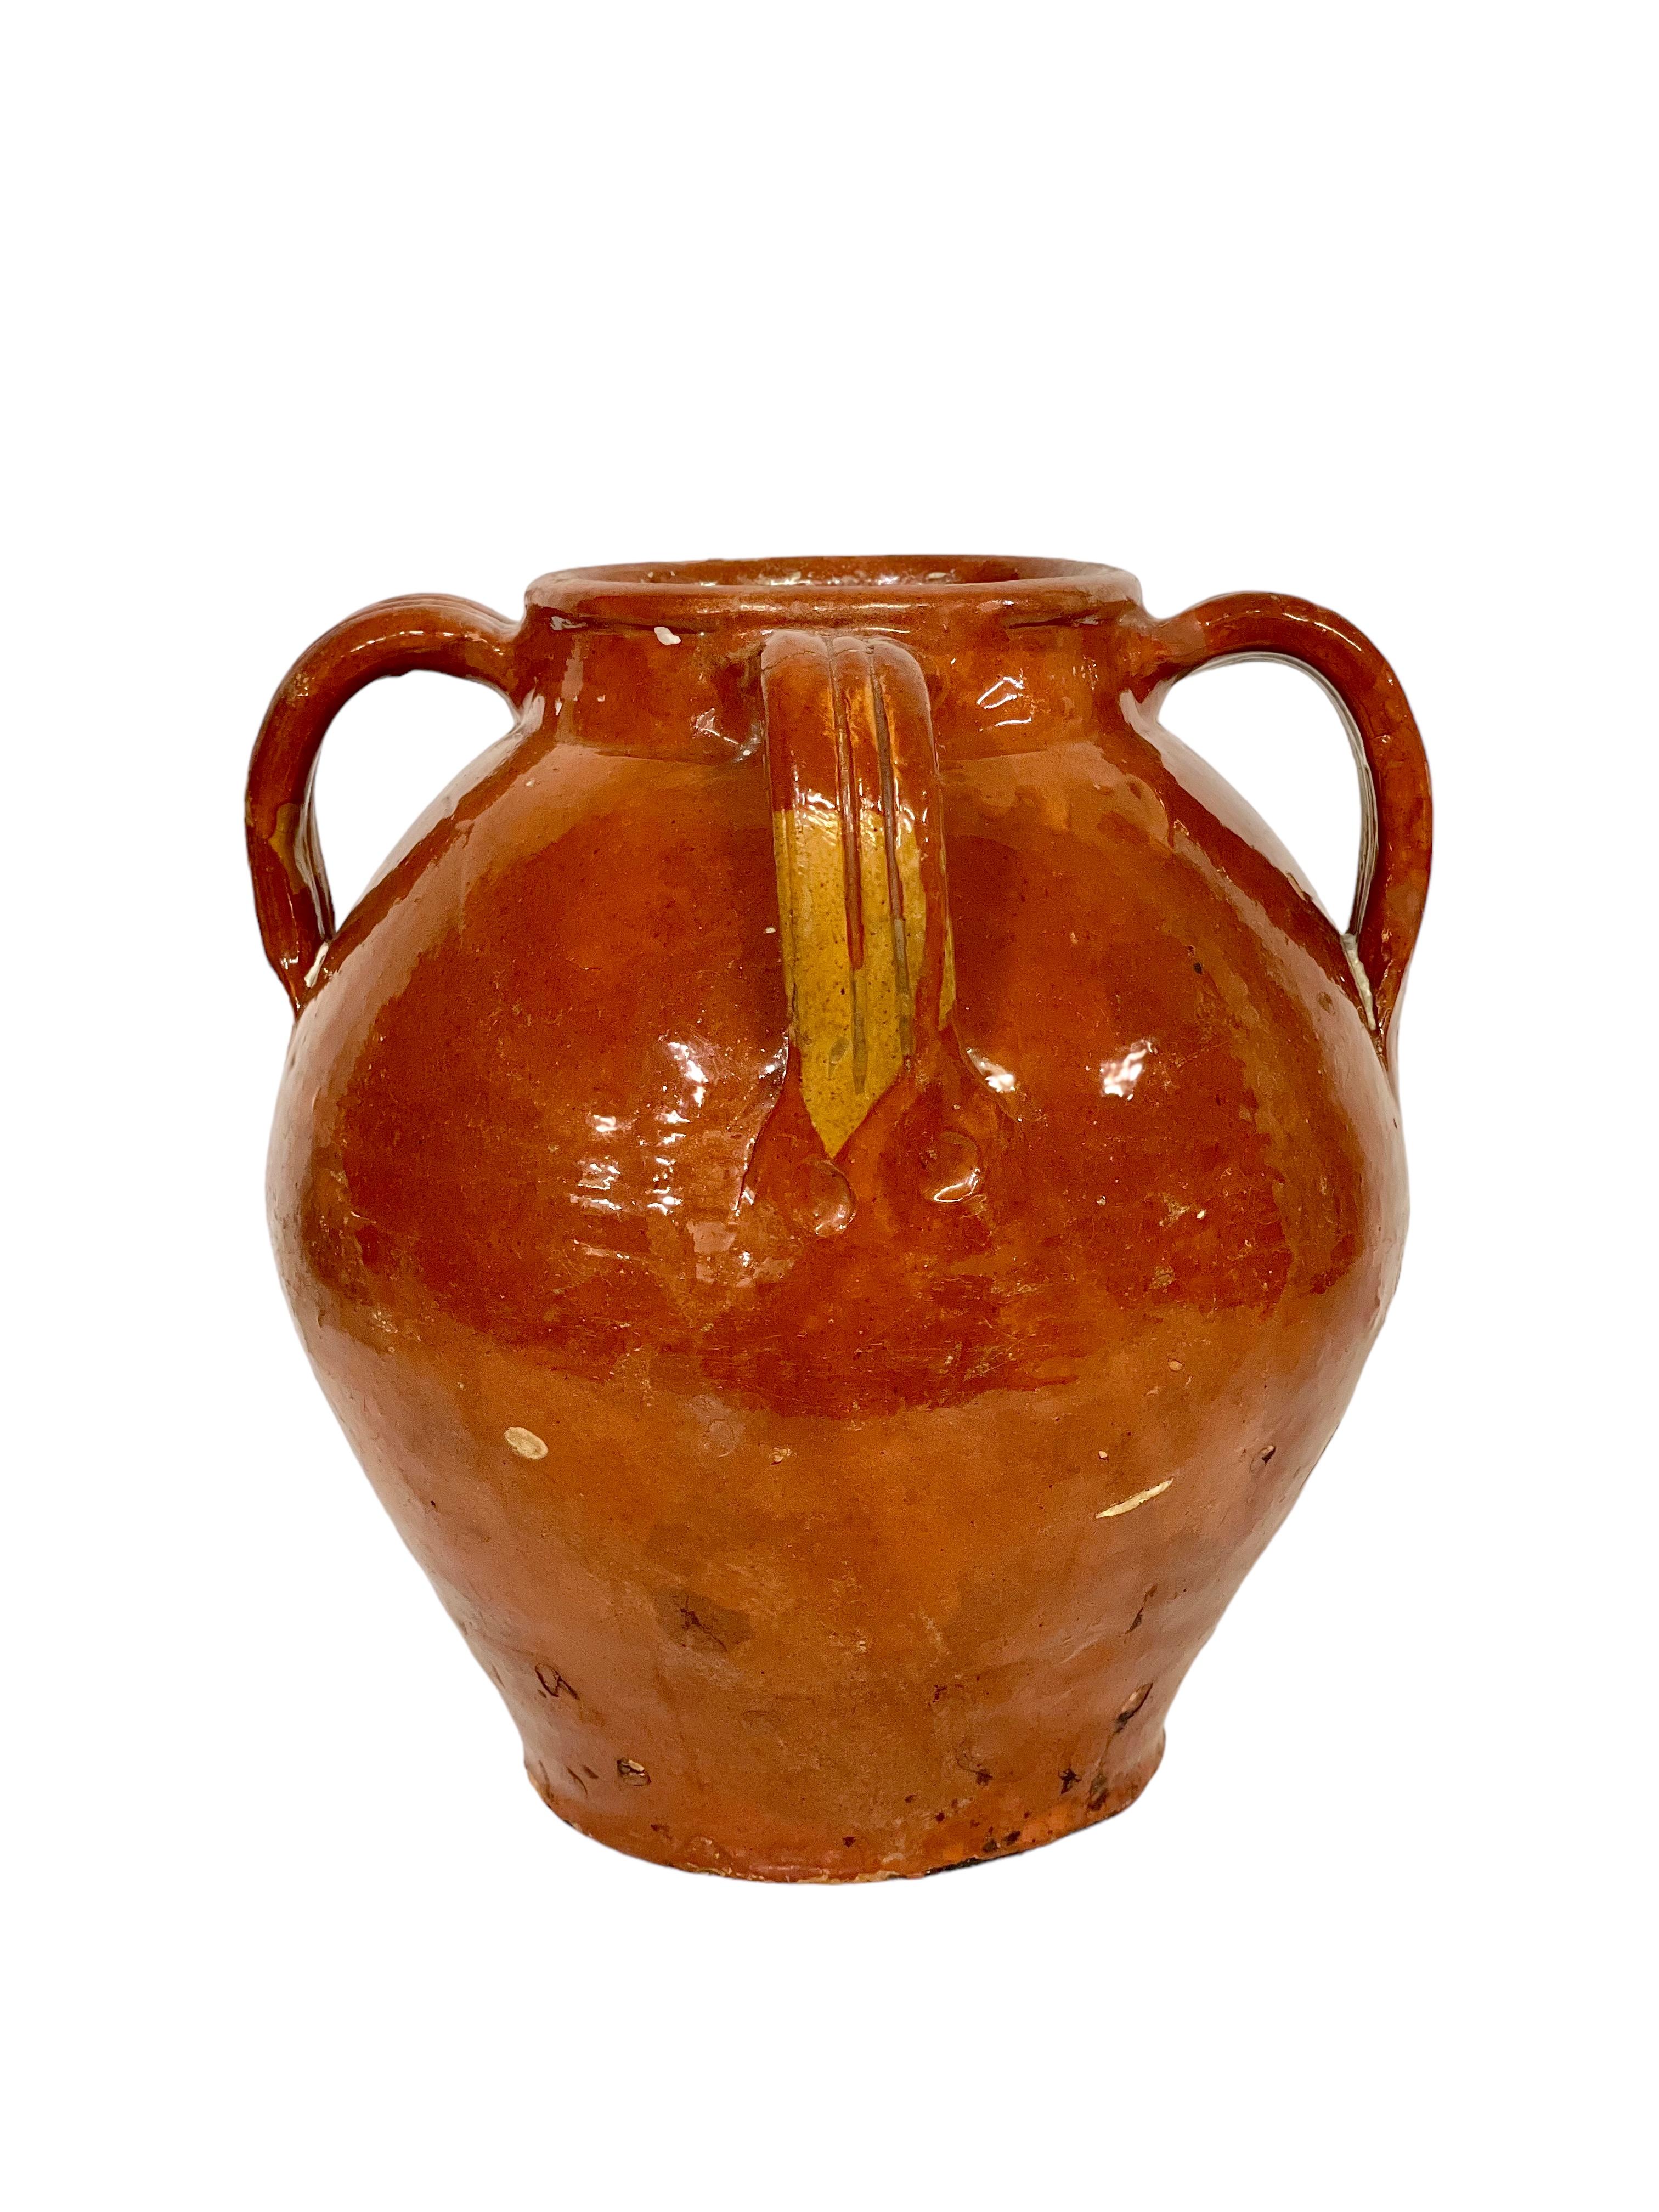 Glazed 19th C. Large French TerracottaJug with Three Handles, from Dordogne Region For Sale